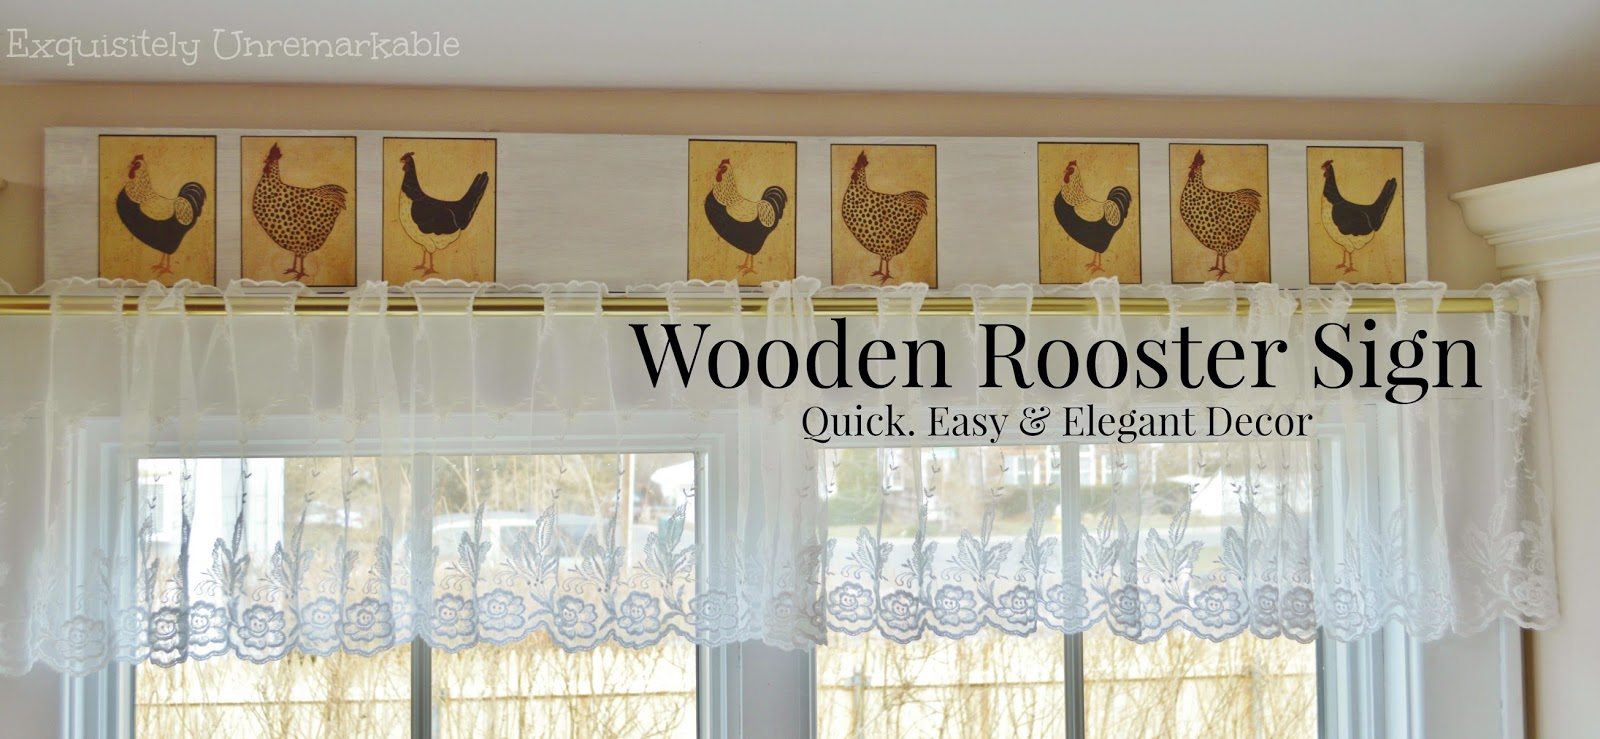 Wooden Rooster Sign